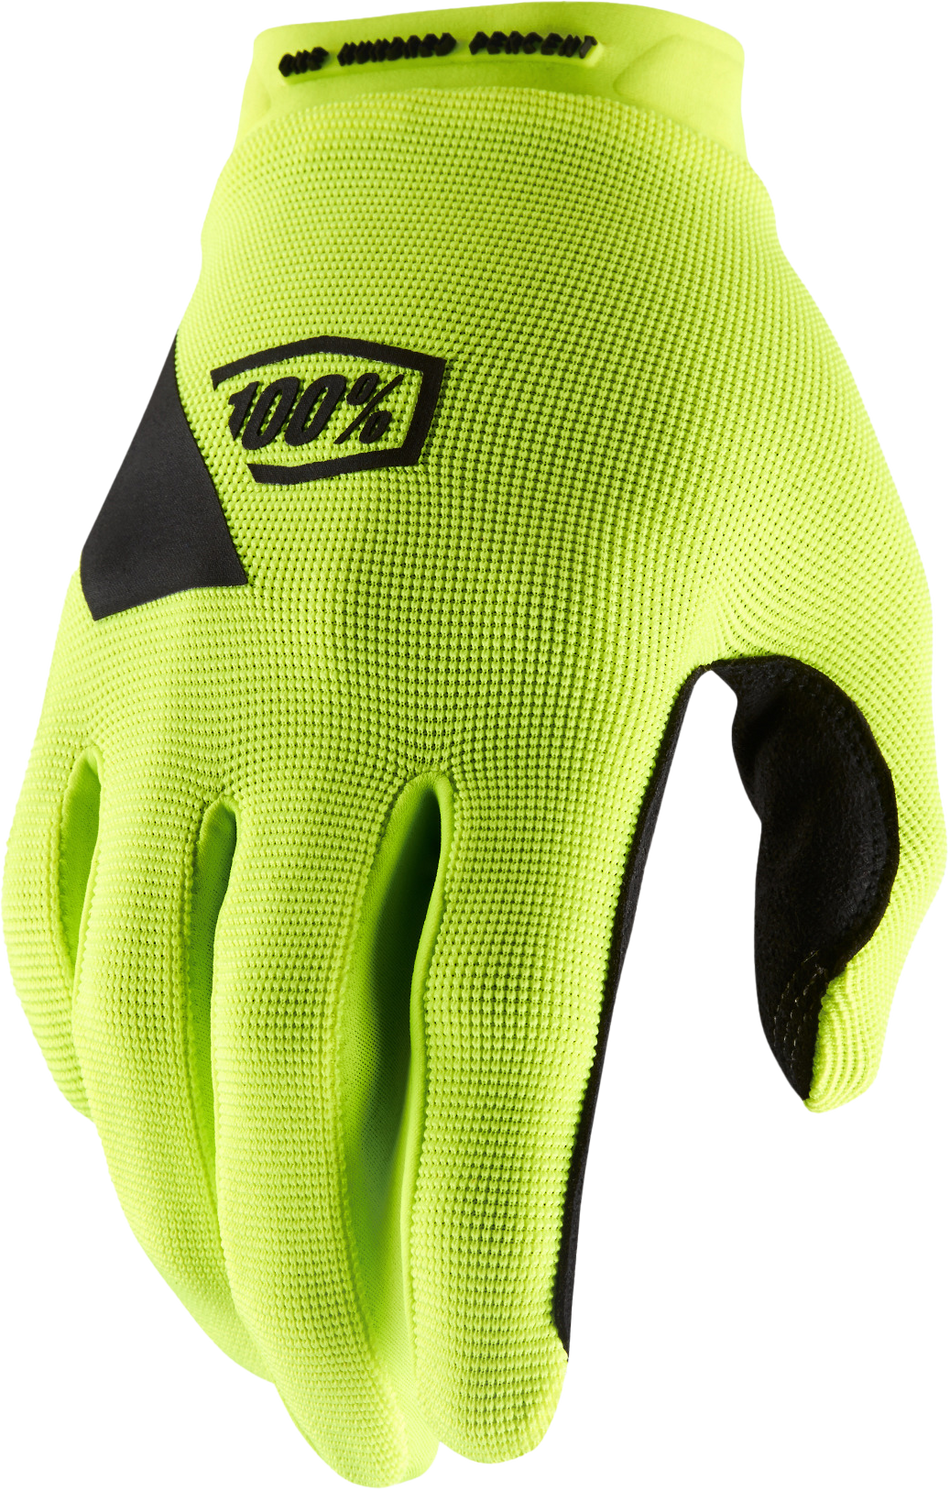 100% Ridecamp Women's Gloves Fluo Yellow/Black Md 10013-00007